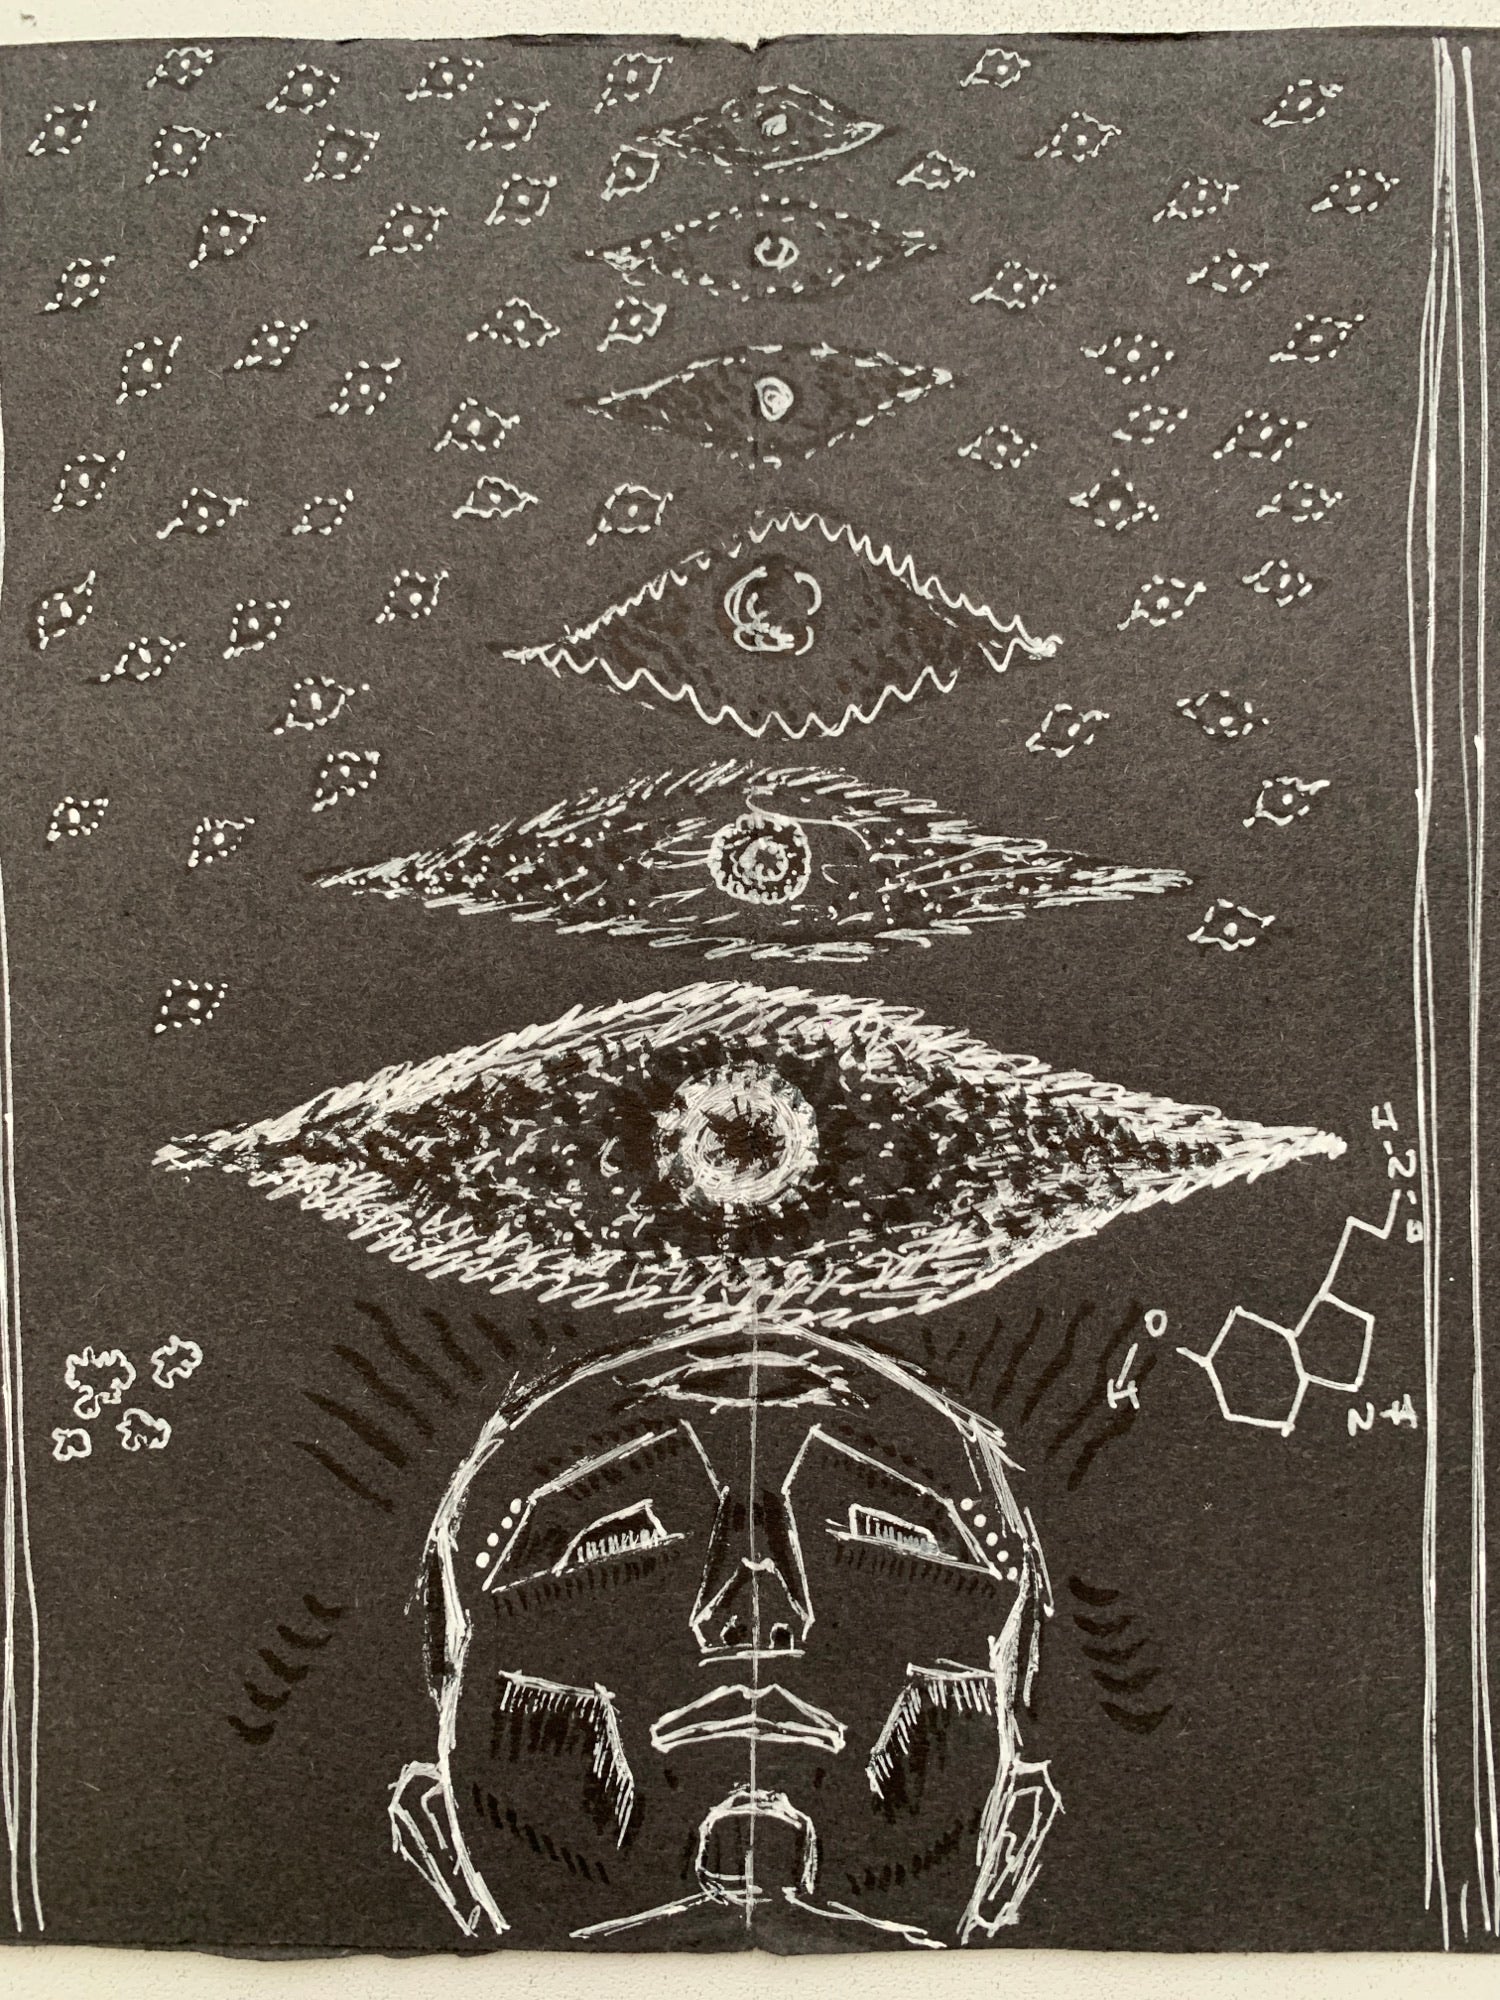 Drawing of a head in the bottom centre, with eyes up the centre of the page from large to small, and other small eyes floating around on the left and right